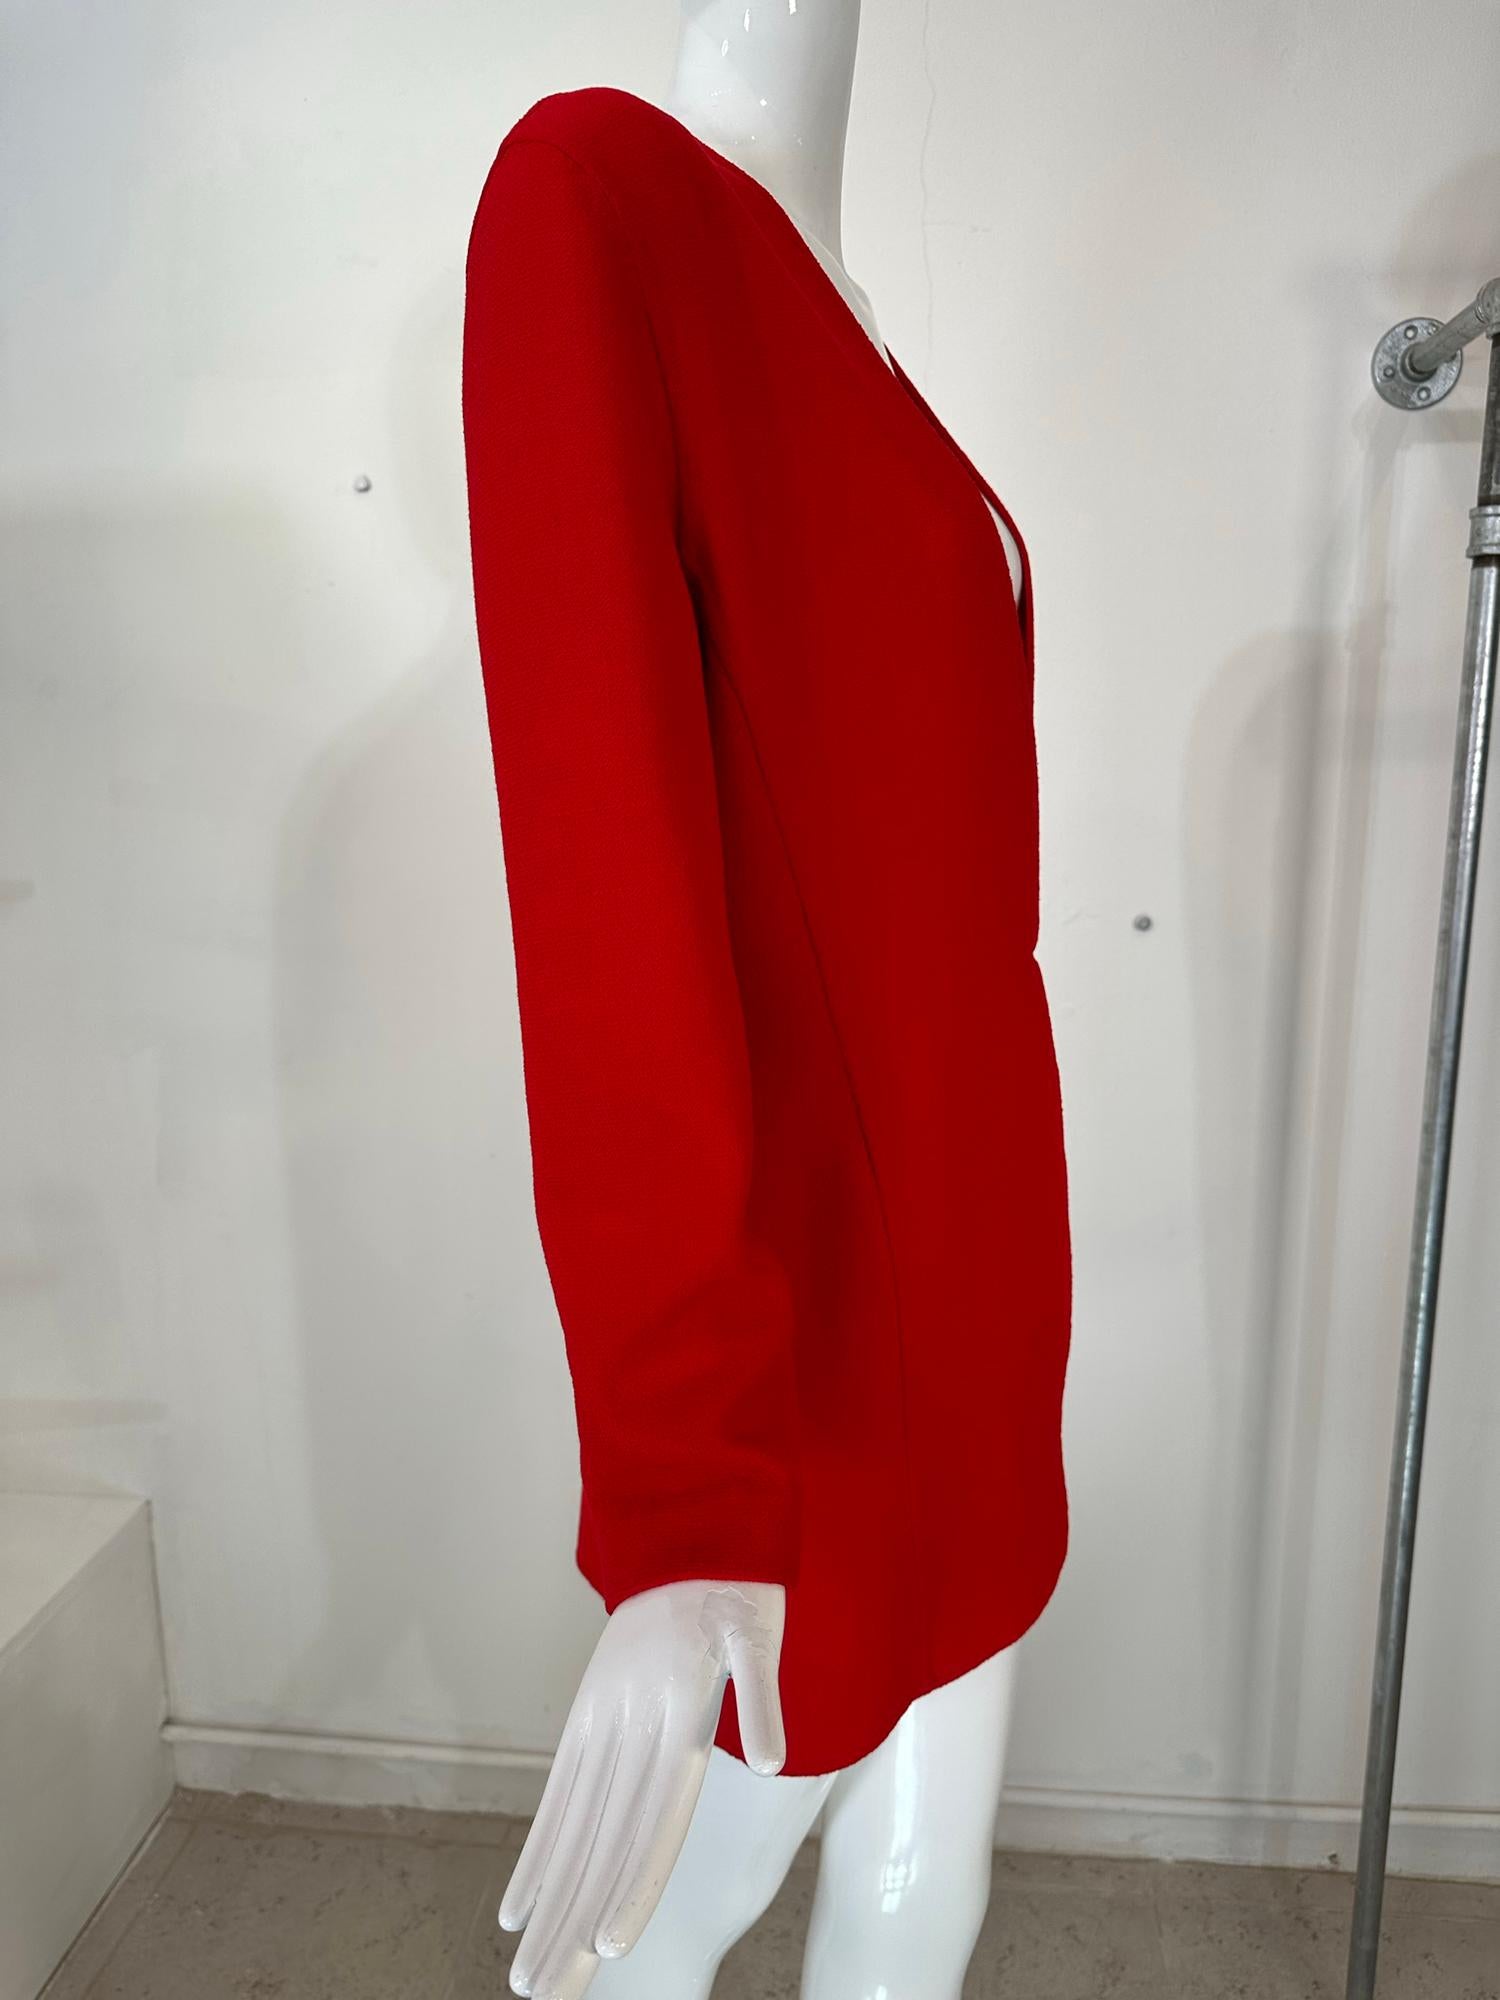 Donna Karan black label fire engine red princess seam, double face wool jacket from the 1990s. Plunge V neck jacket closes at the lower waist with hidden hook & self loop. Below hip length jacket is unlined. Drop shoulder with padded shoulders. Flat